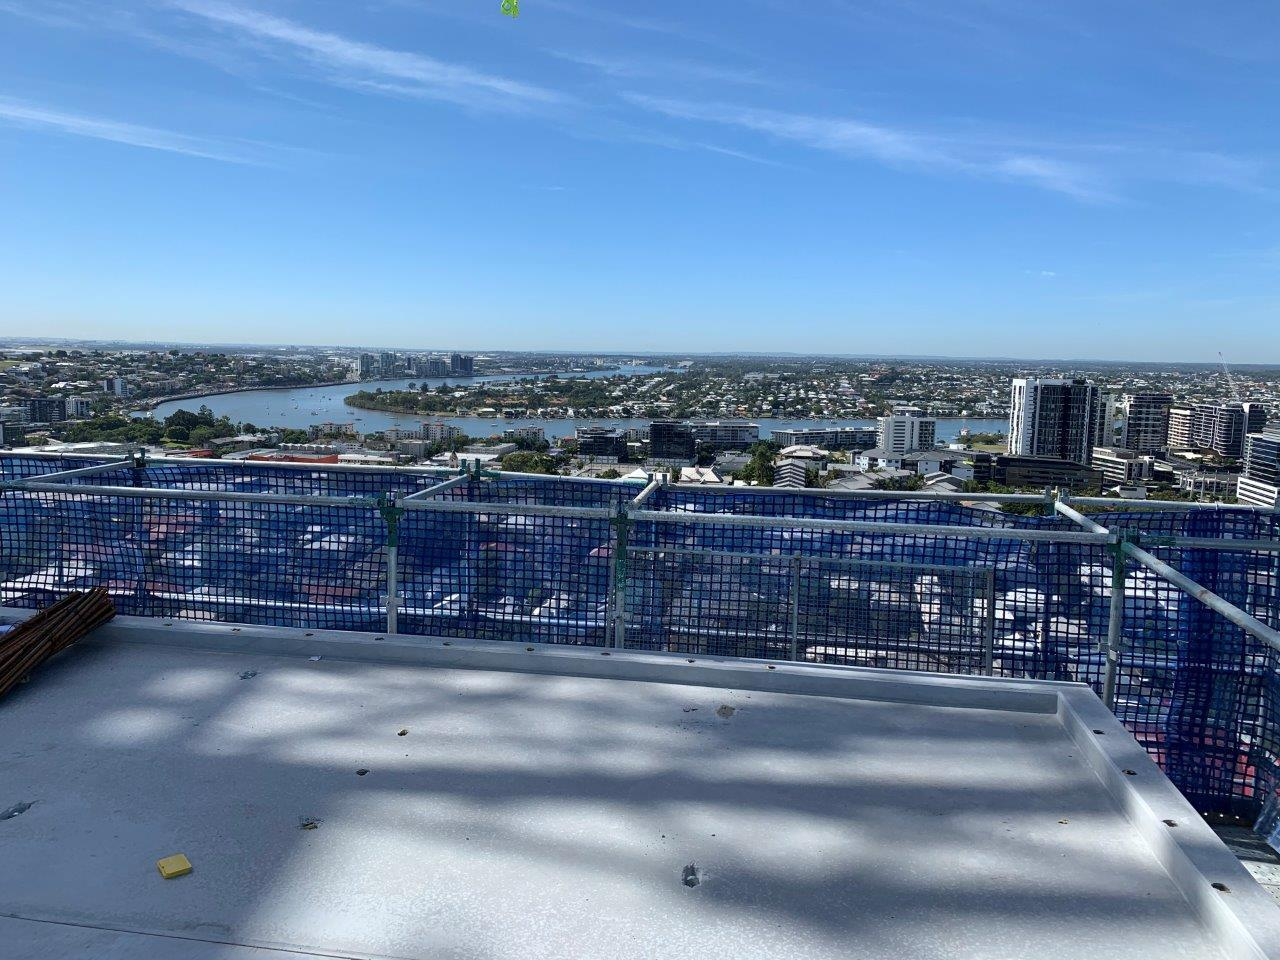 Panorama Construction Update April 2020 (image supplied by the developer)6